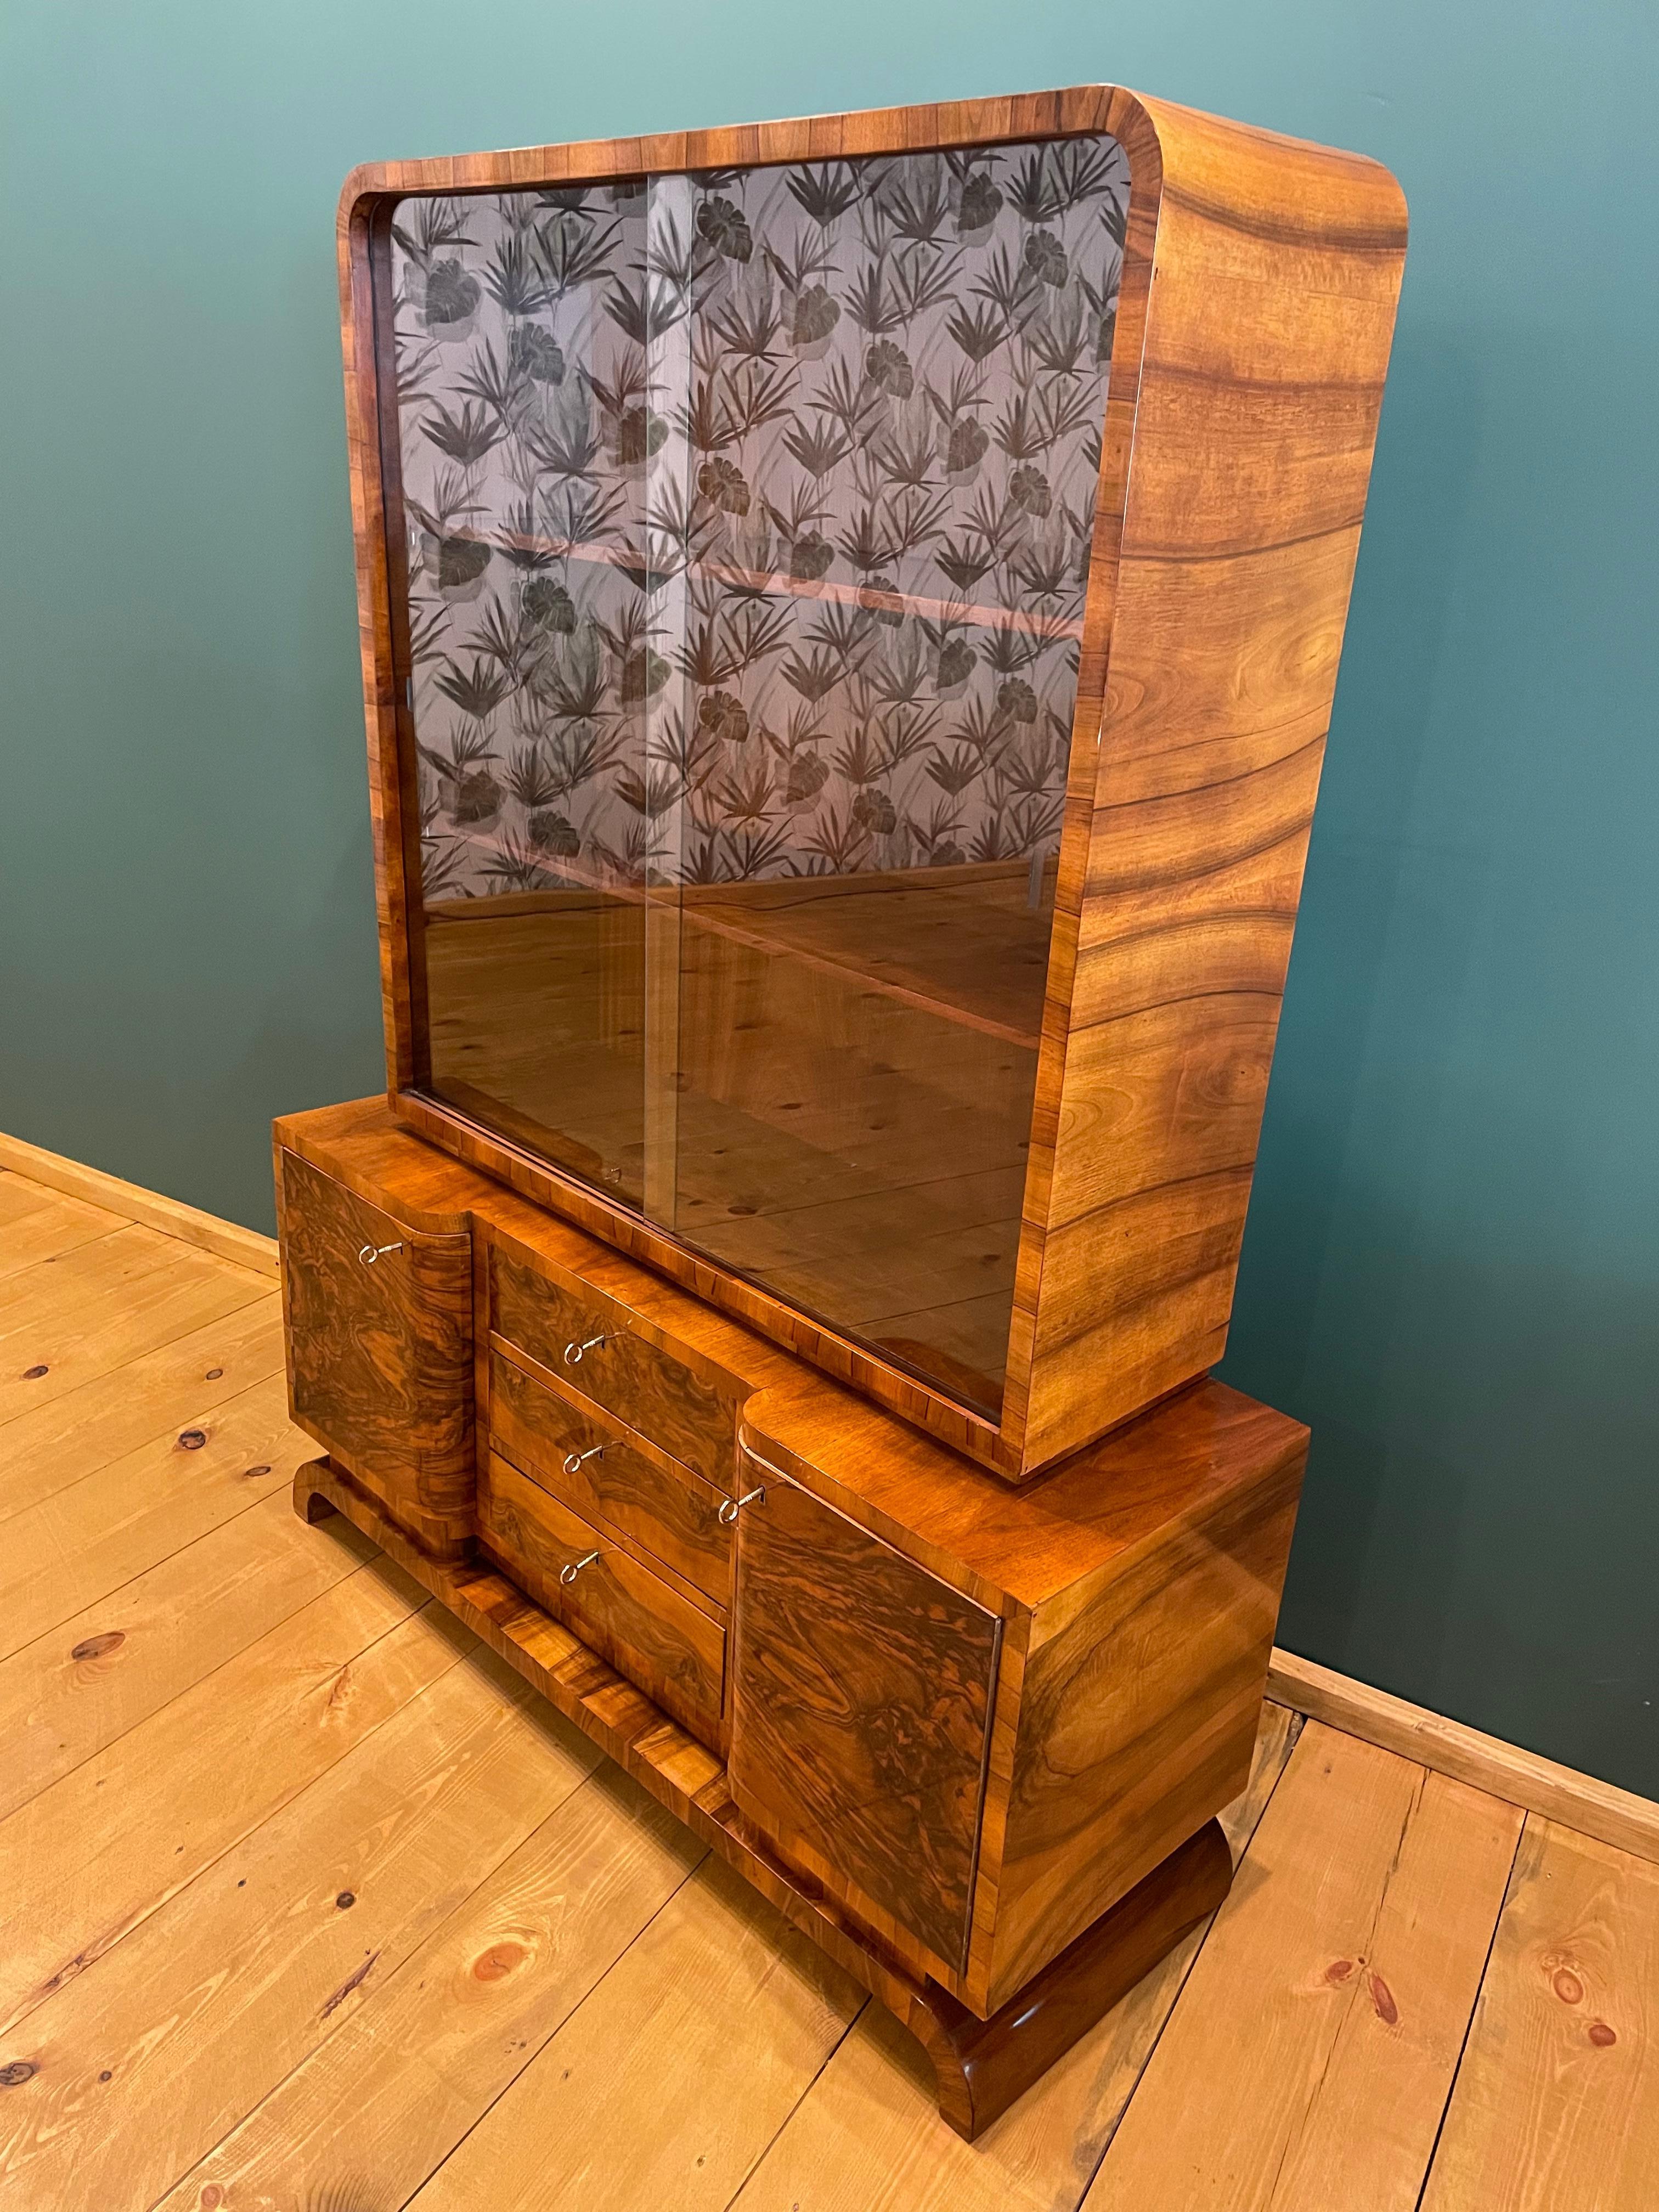 

It has been cleaned to bare veneer, disinfected and finished by hand with high gloss shellac polish.

Every piece of furniture that leaves our workshop from the beginning to the end is subjected to manual renovation, so as to restore its original